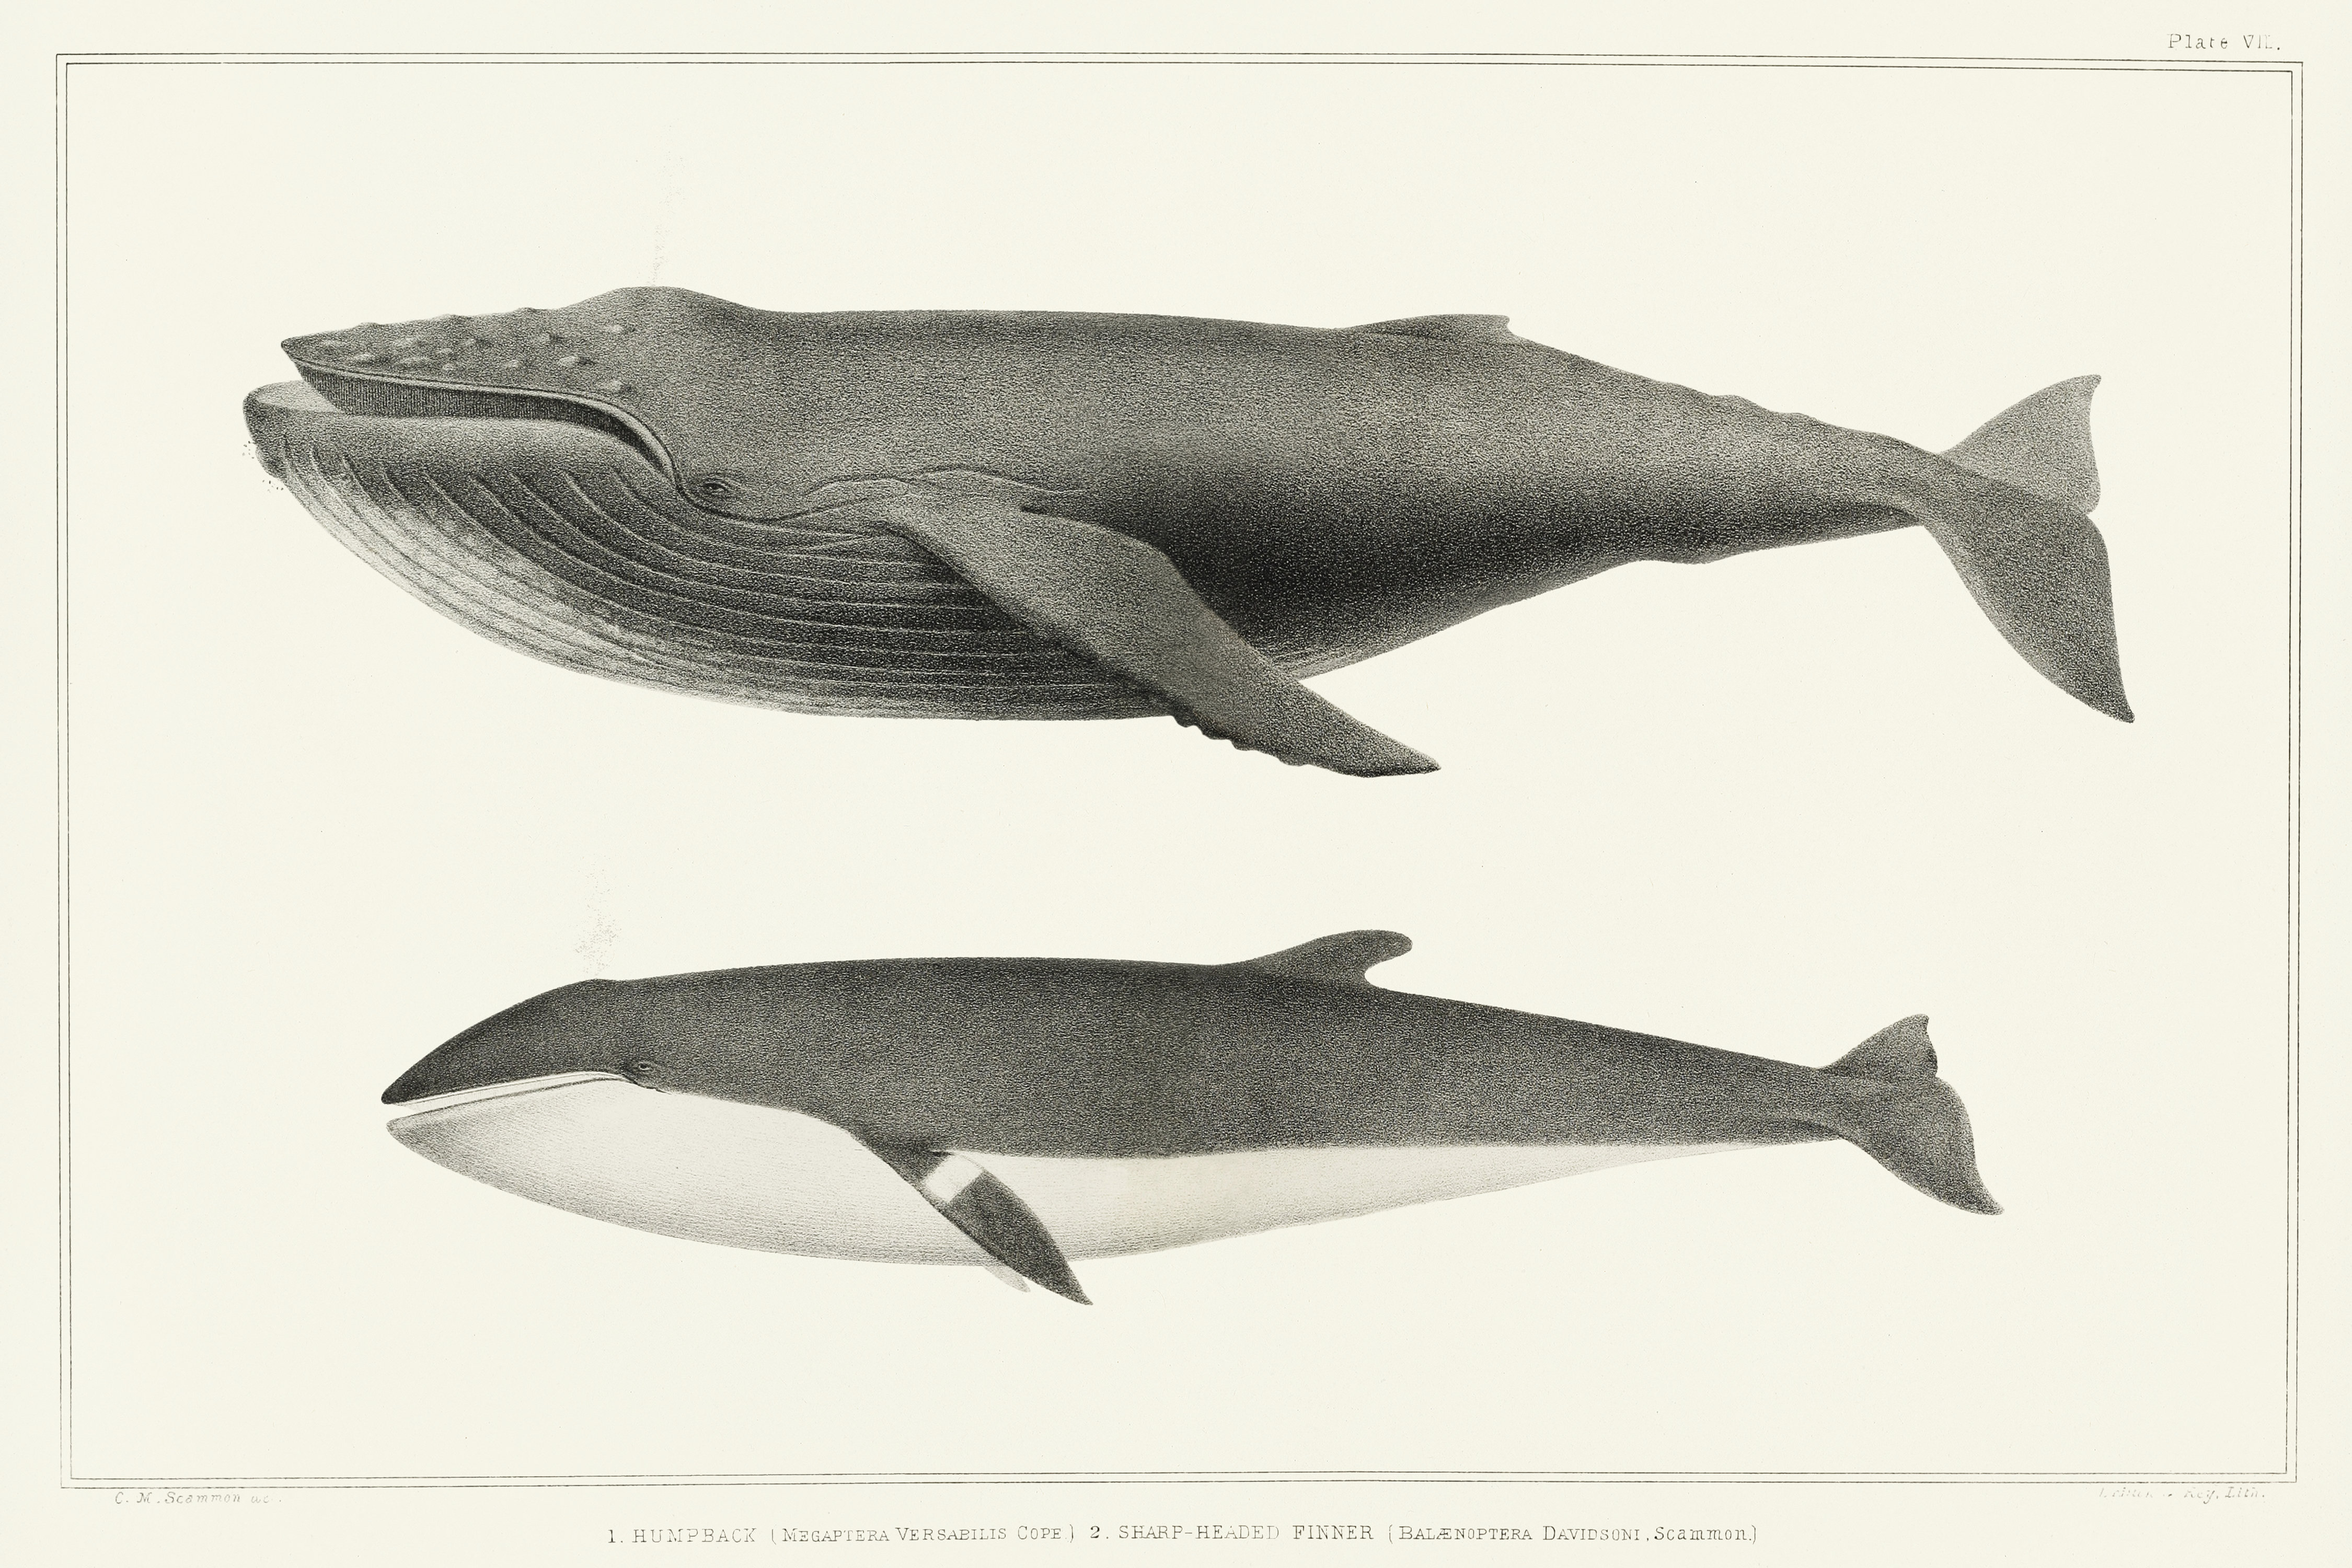 Breakwater Bay Duncarbit Melville's Whales II On Canvas by Charles Melville  Scammon Print